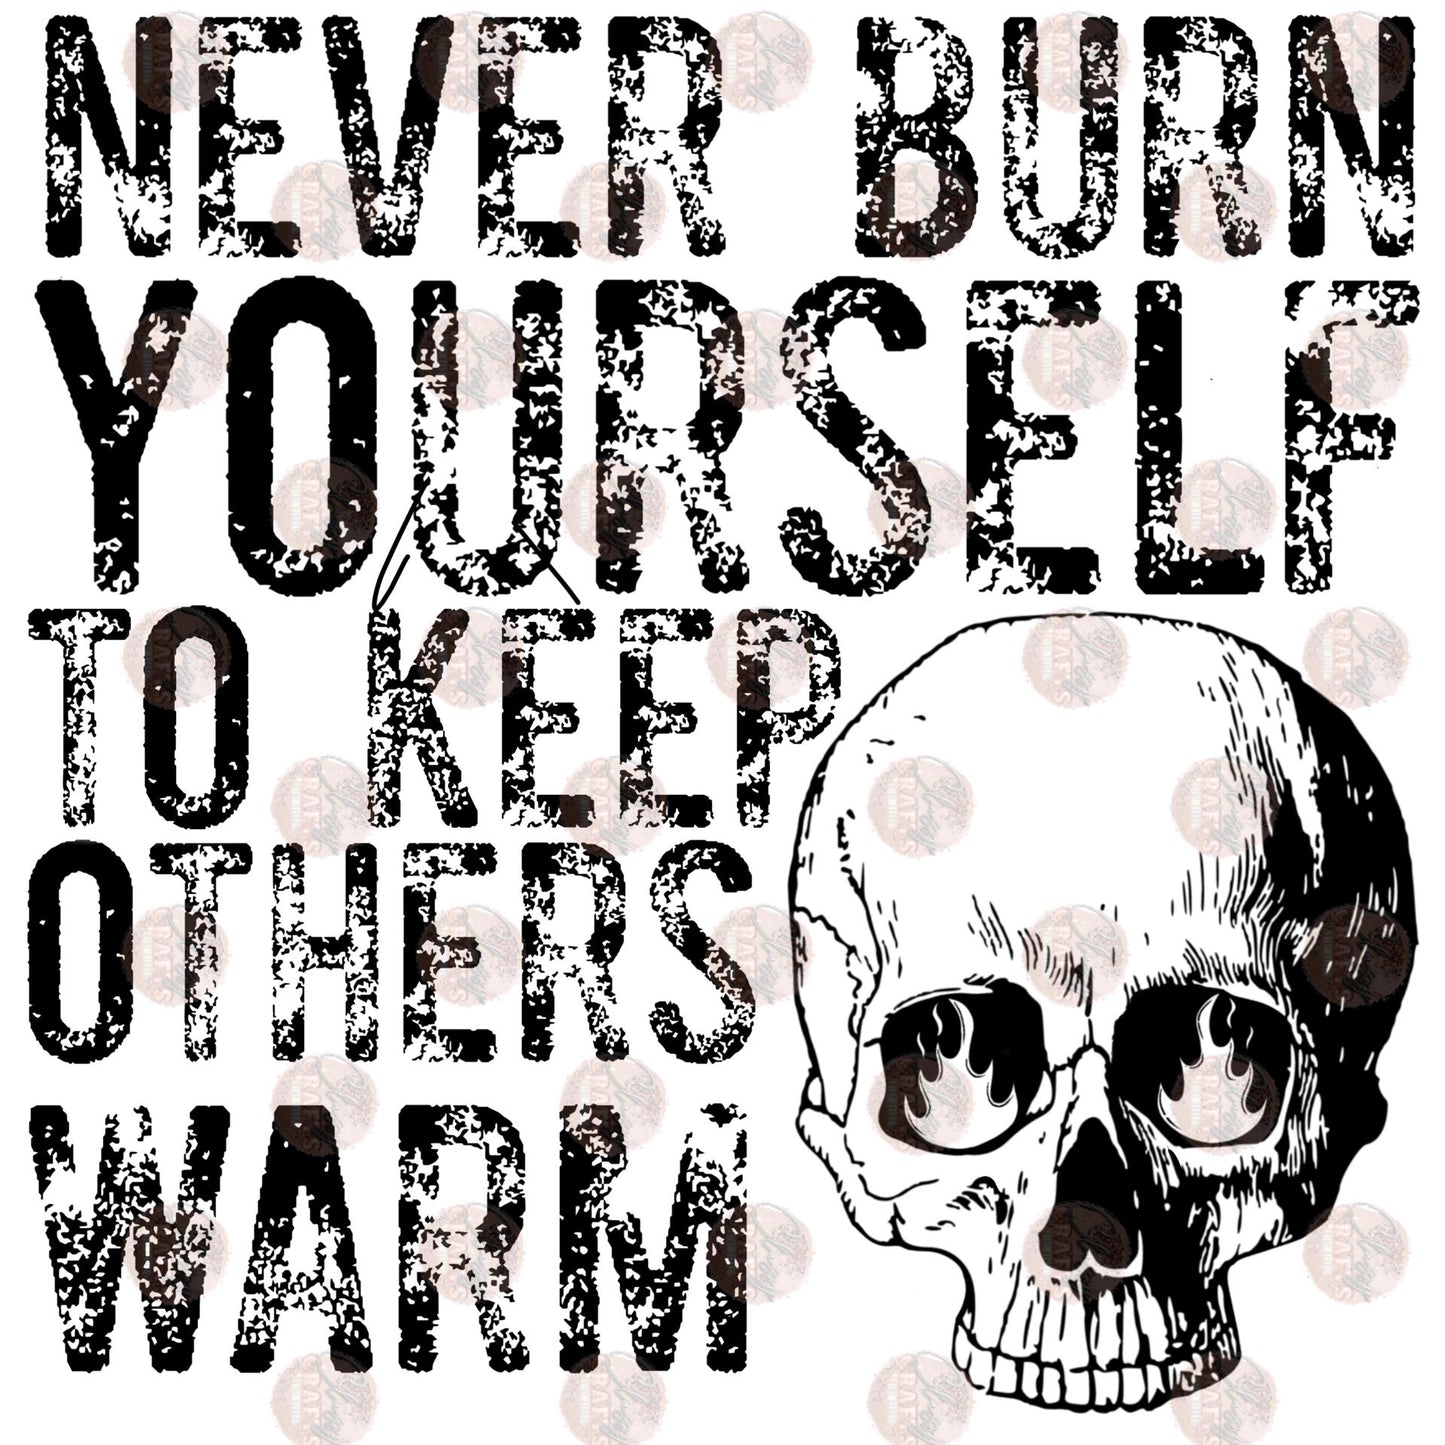 Never Burn Yourself To Keep Others Warm - Sublimation Transfer